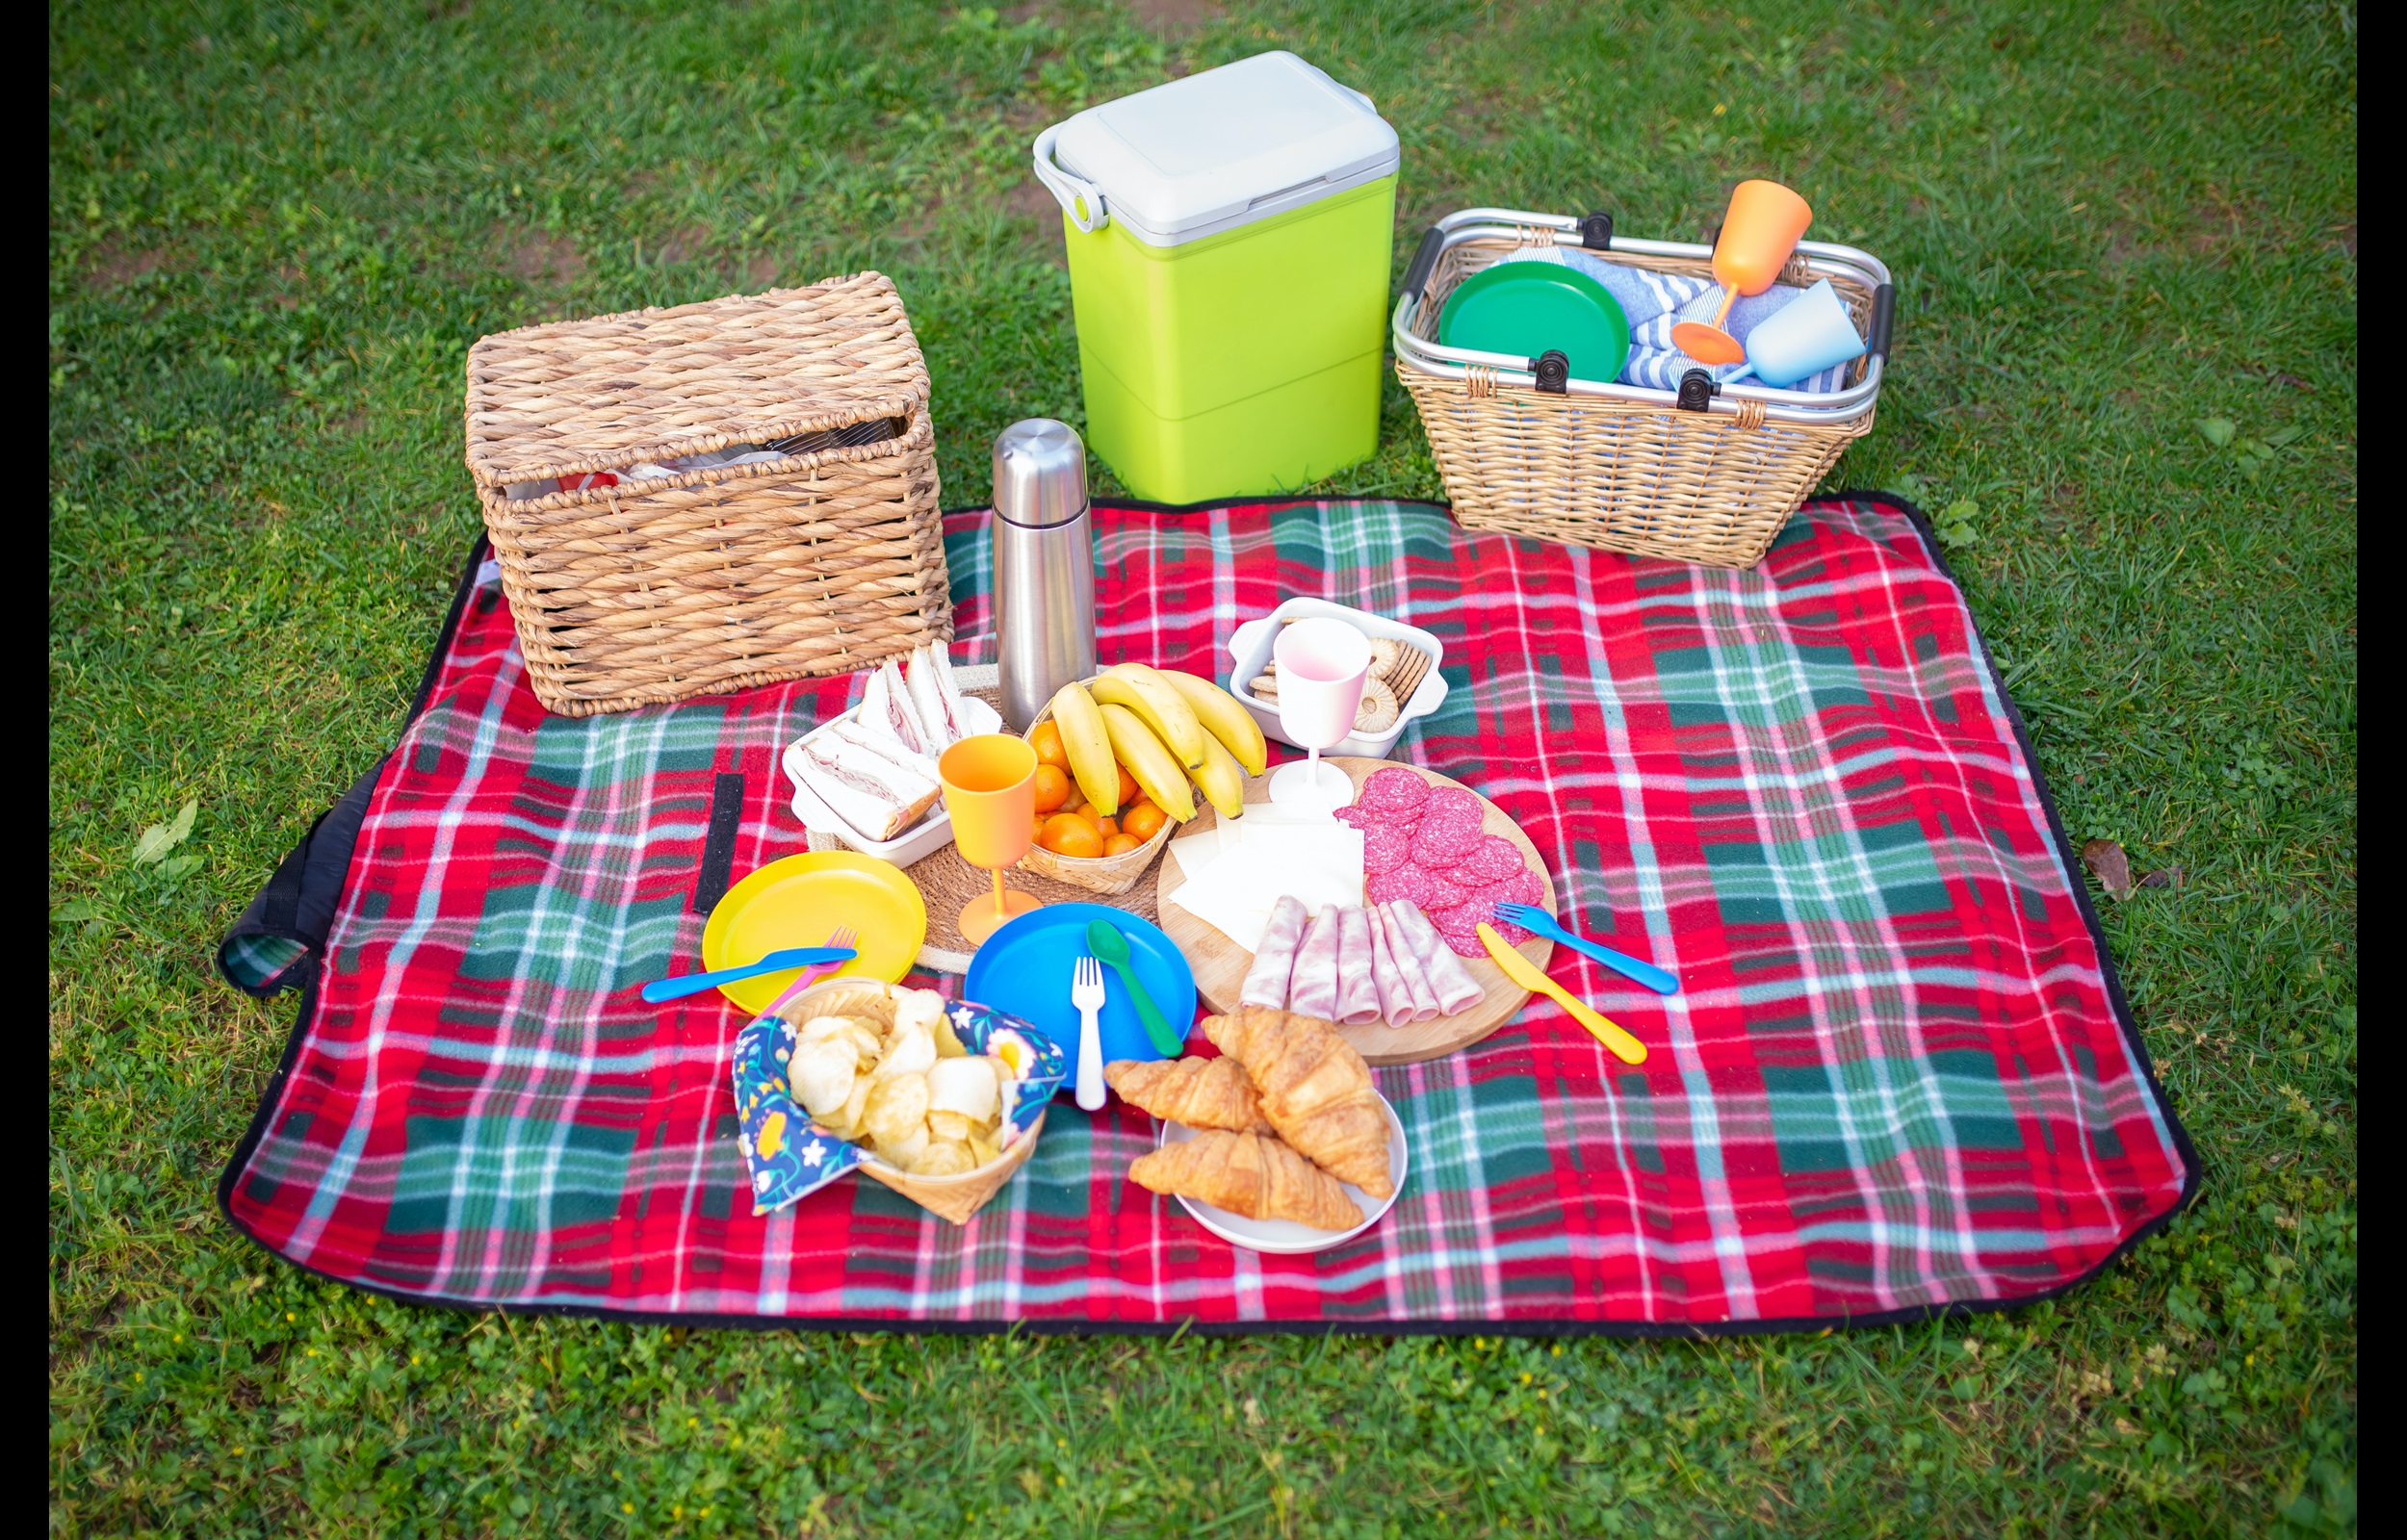 A red and green plaid blanket sits on a lawn and contains crackers, meats, cheese, and picnic baskets and coolers 